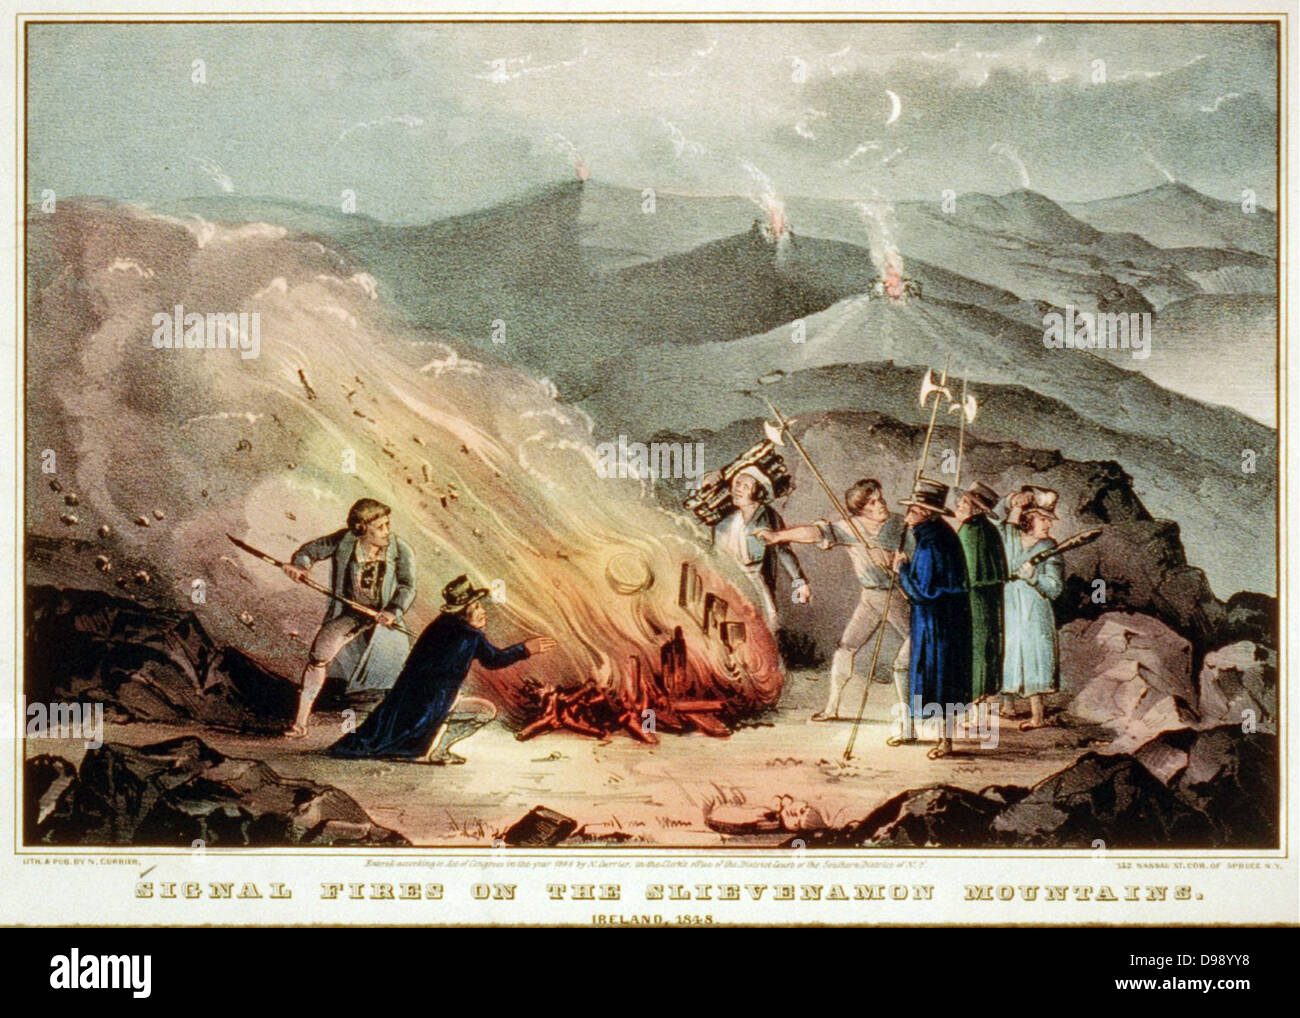 Signal fires on the Slievenamon Mountains - Ireland, 1848 / Lith. & pub. by N. Currier, 152 Nassau St. Cor. of Spruce N.Y.  Currier & Ives--Signal fires on the Slievenamon. Print shows a group of men surrounding a bonfire on a mountaintop during an insurrection in Tipperary. Three men hold weapons while other men tend the fire. lithograph, hand-colored.  c1848 Oct. 2 Stock Photo